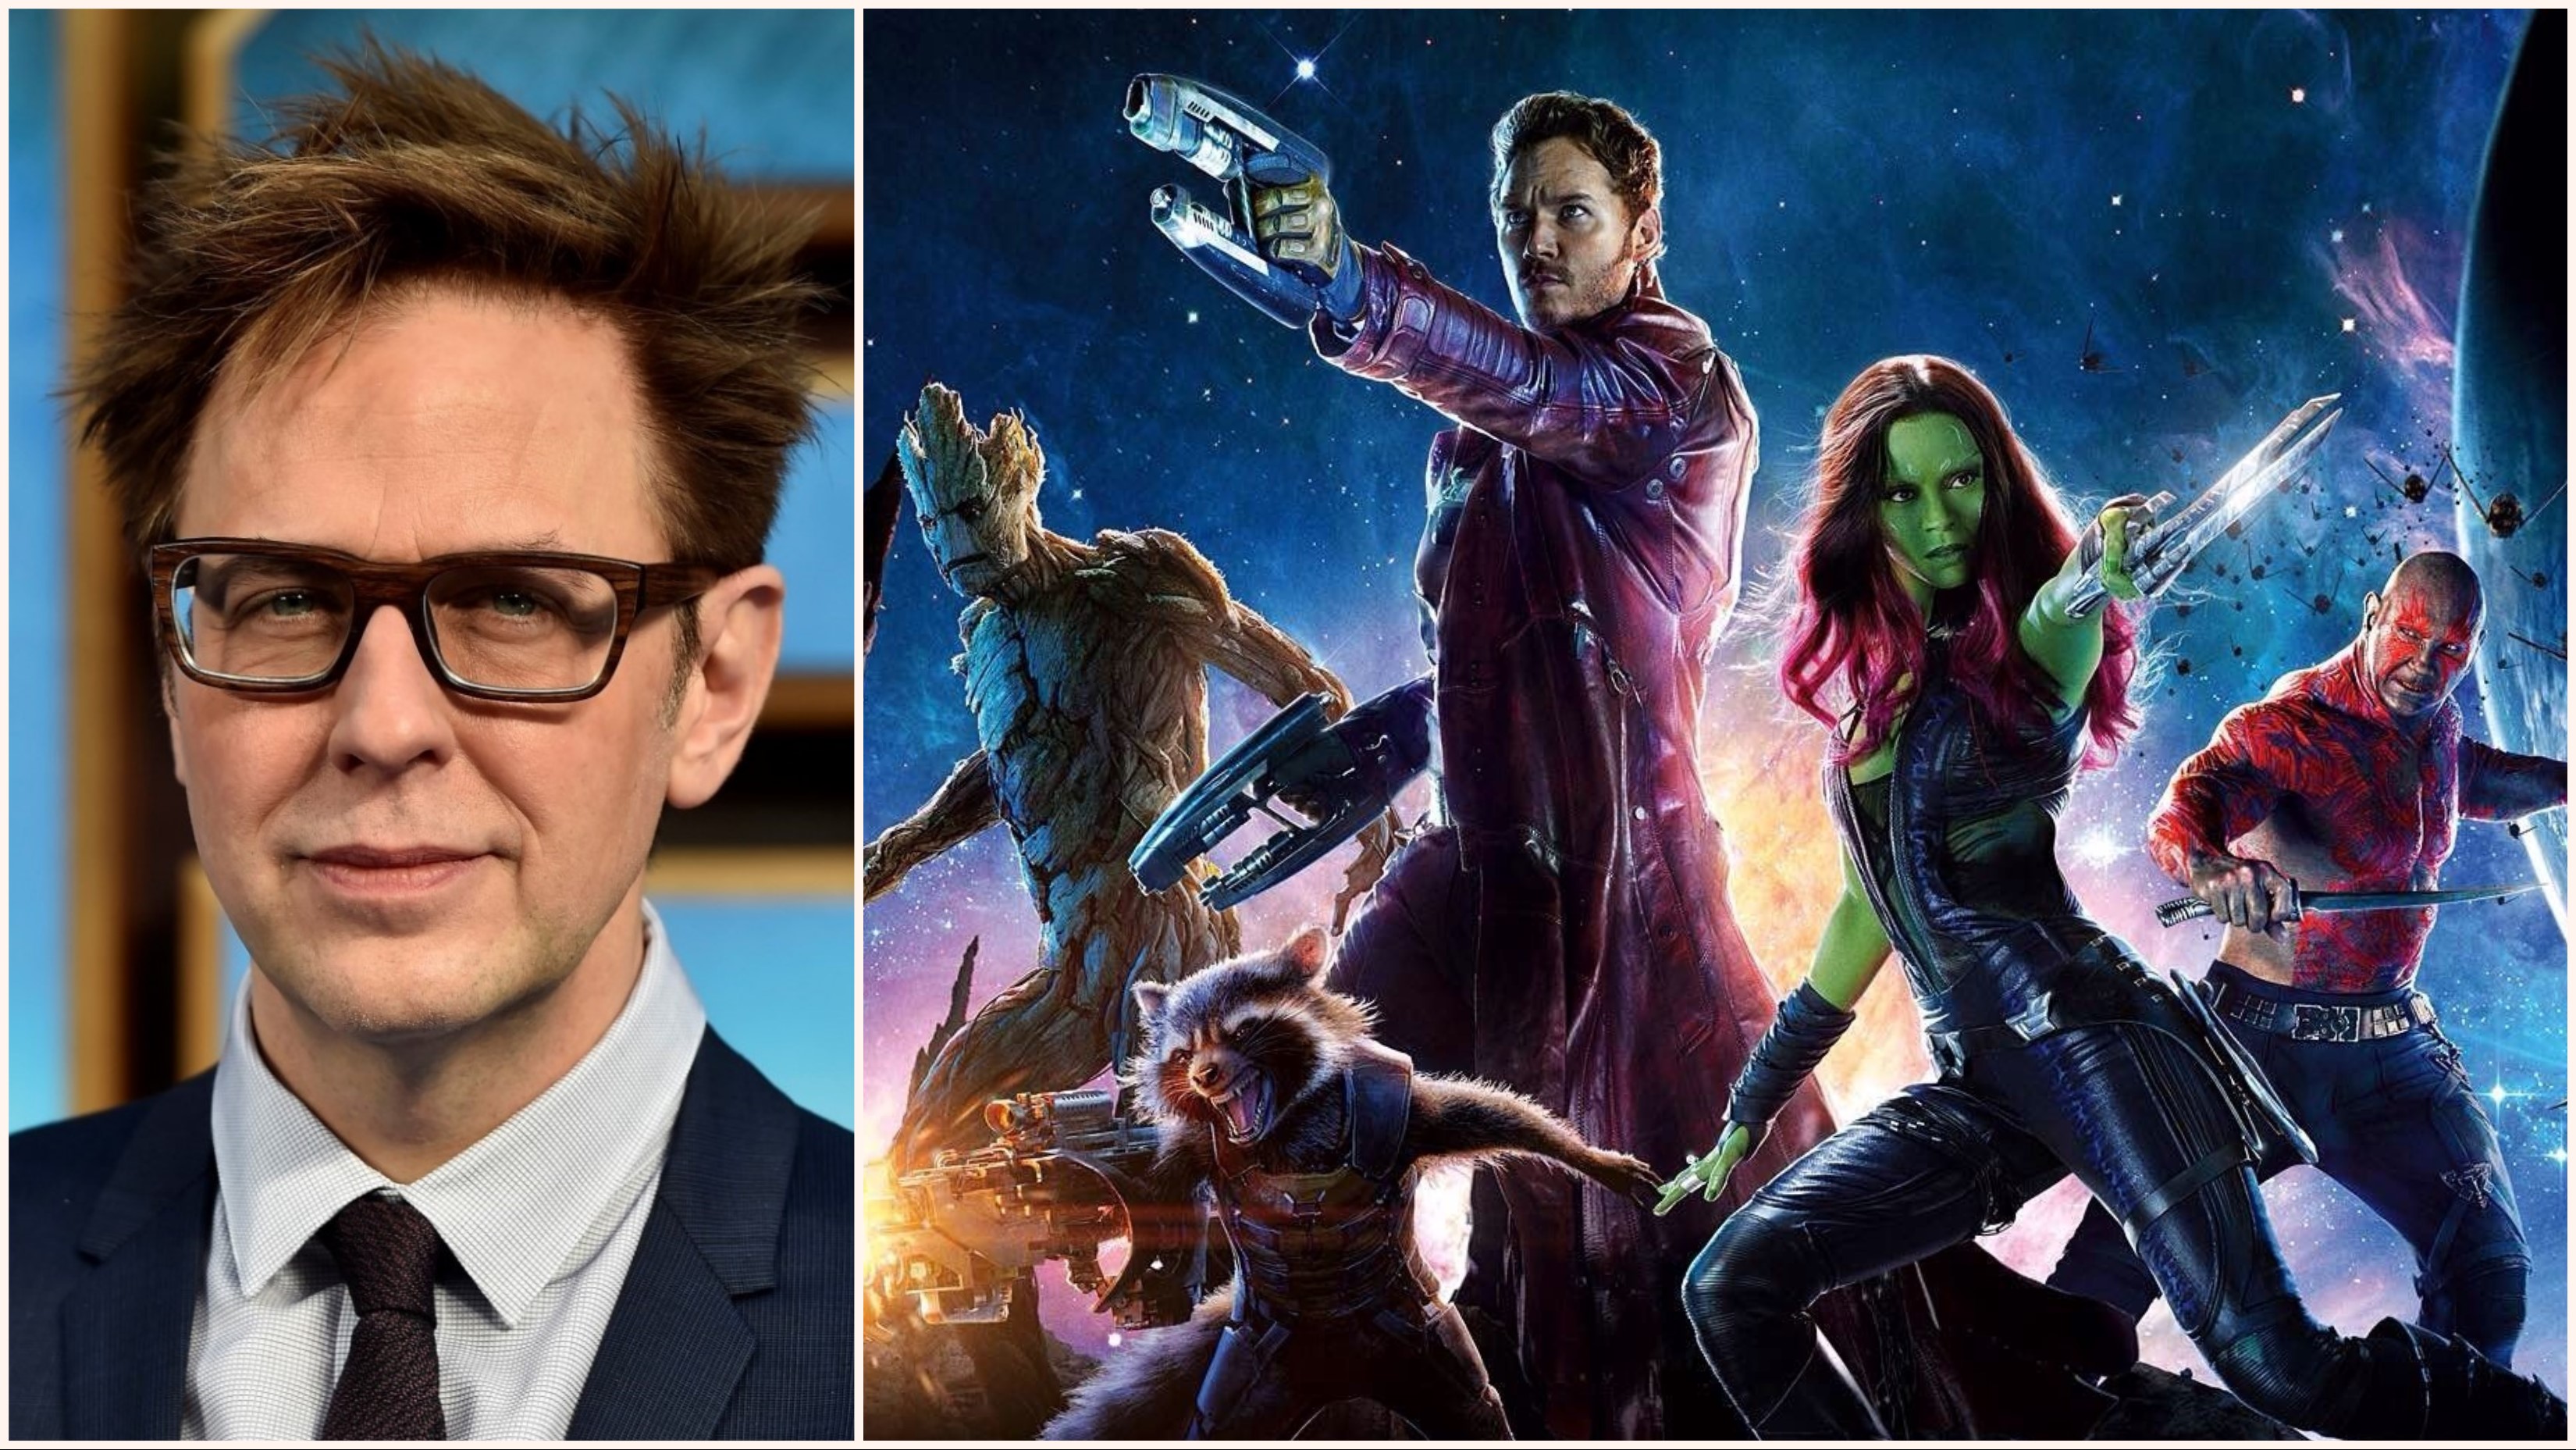 James Gunn Returning To Direct 'Guardians Of The Galaxy Vol. 3'